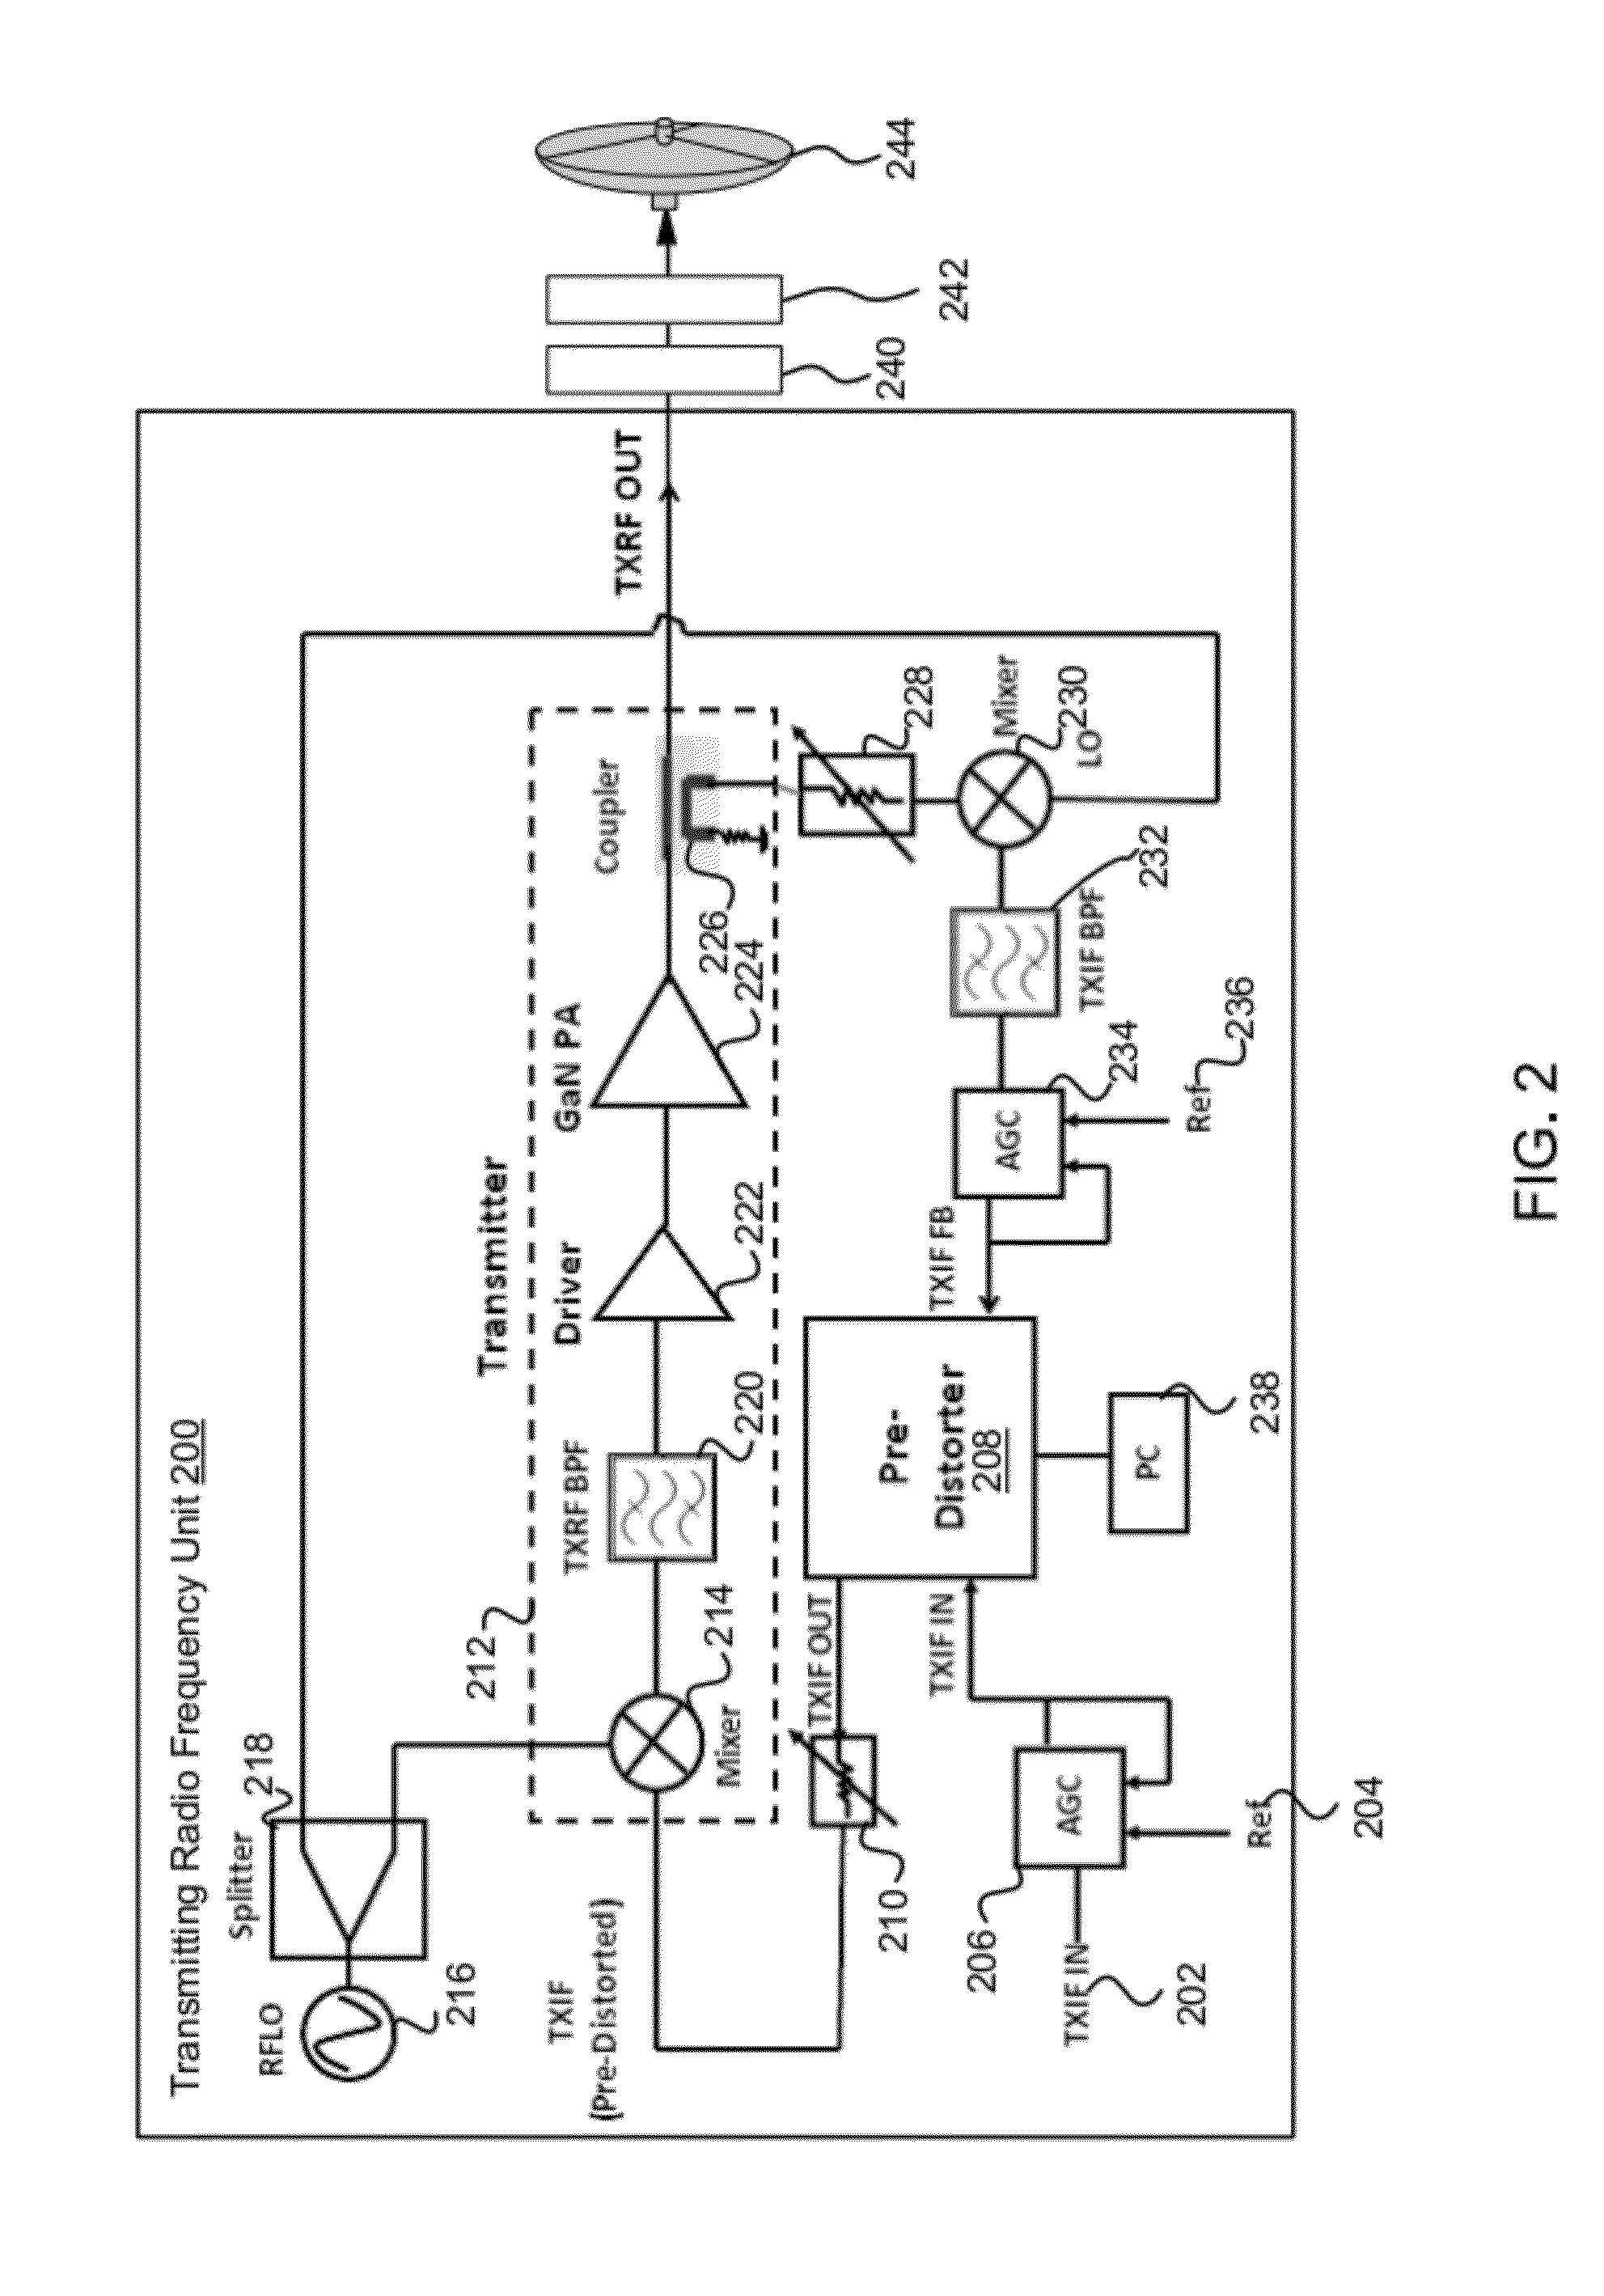 Systems and methods for a radio frequency transmitter with improved linearity and power out utilizing pre-distortion and a GAN (gallium nitride) power amplifier device